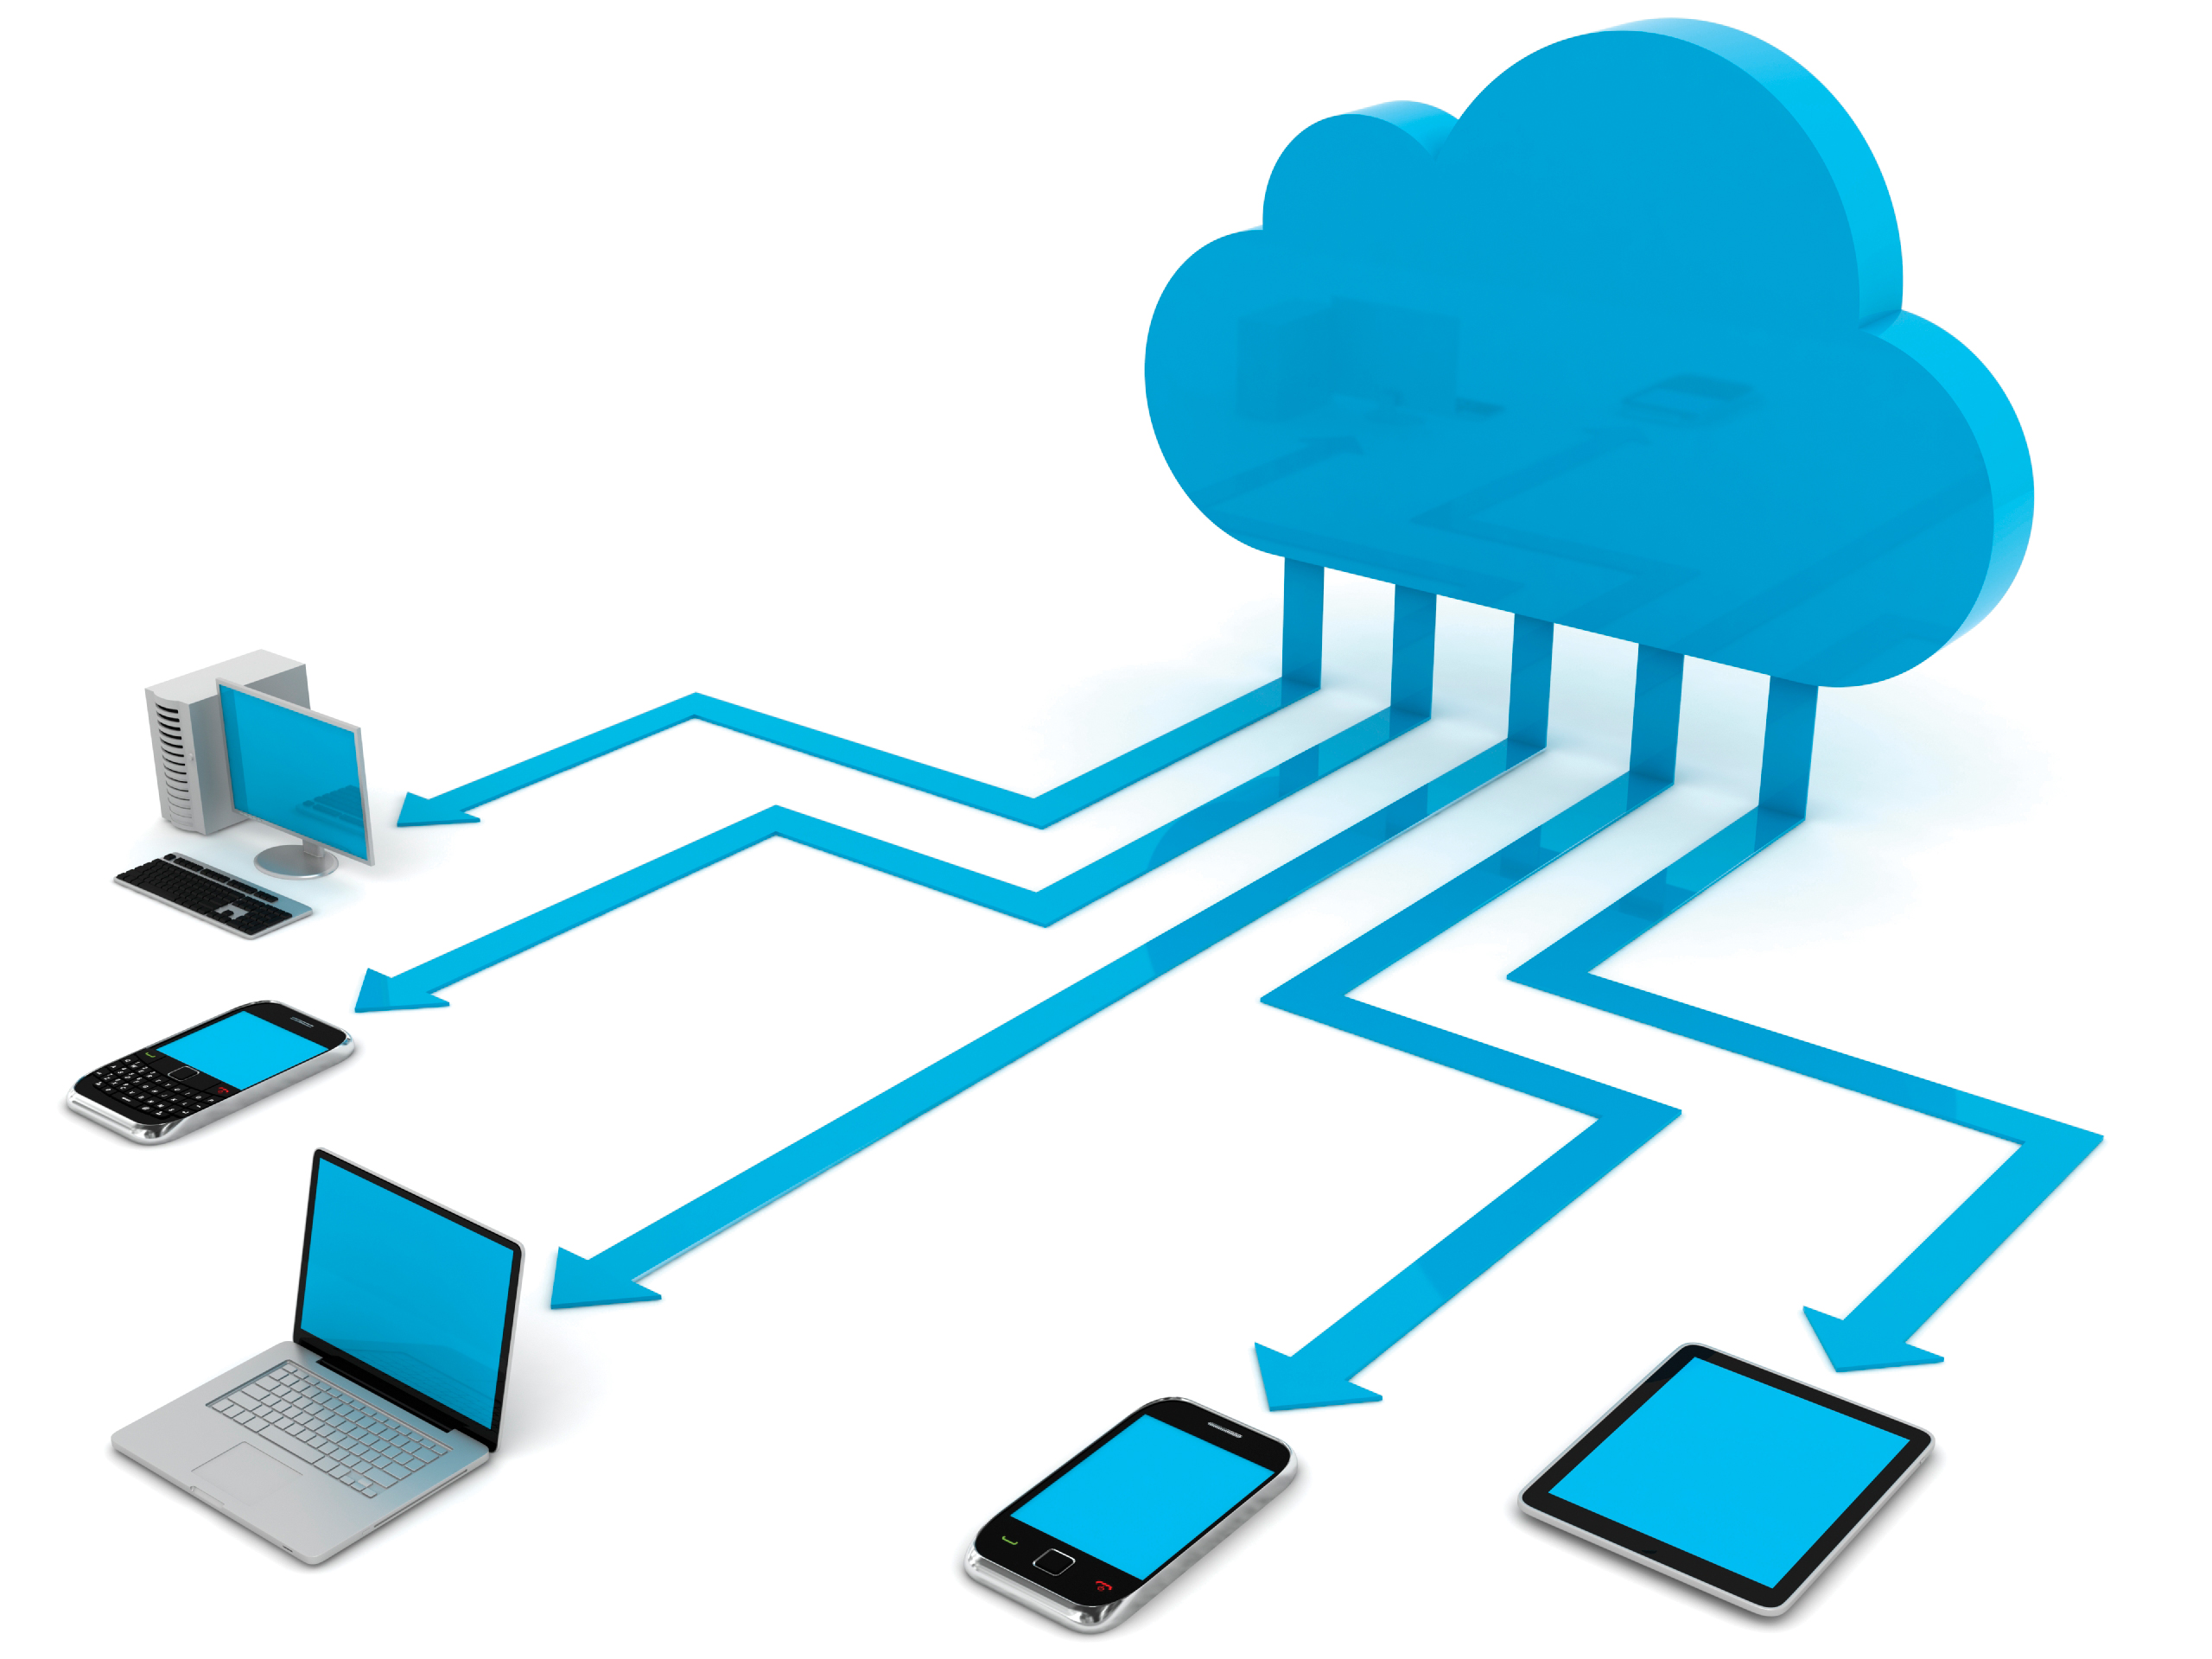 Cloud computing: more competitive thanks to the cloud?